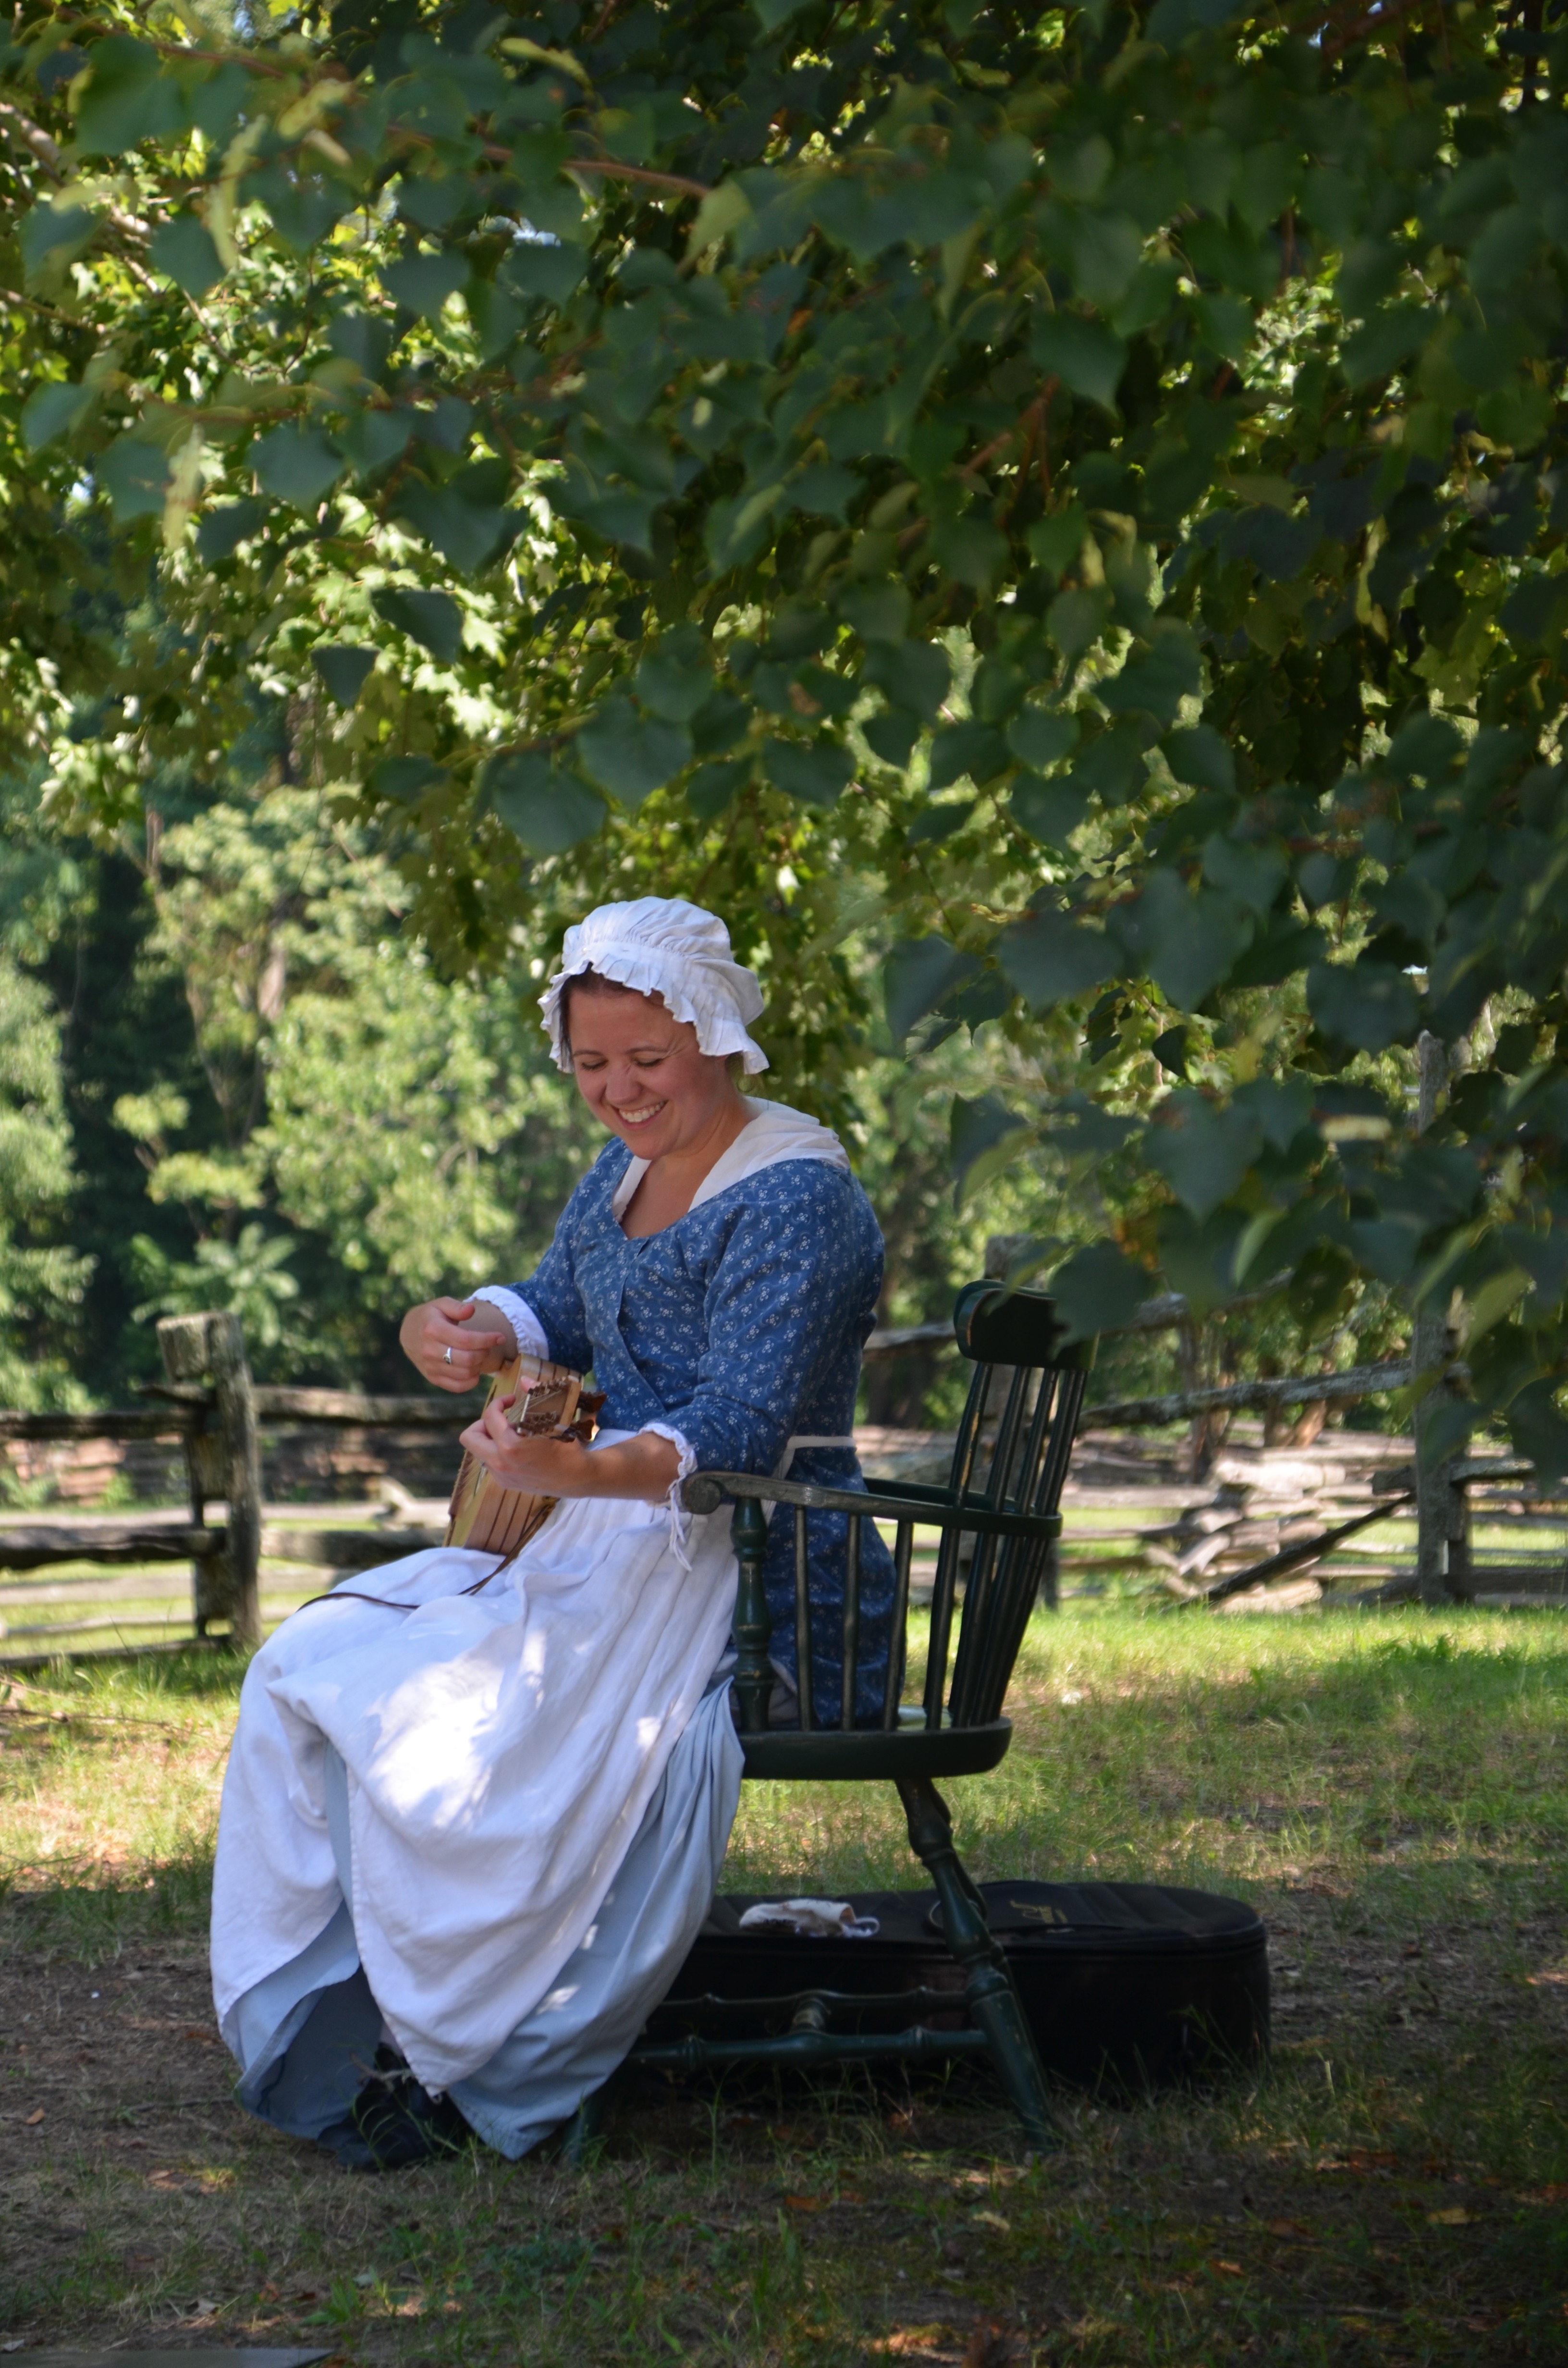 5 FUN THINGS TO DO IN COLONIAL WILLIAMSBURG, VA